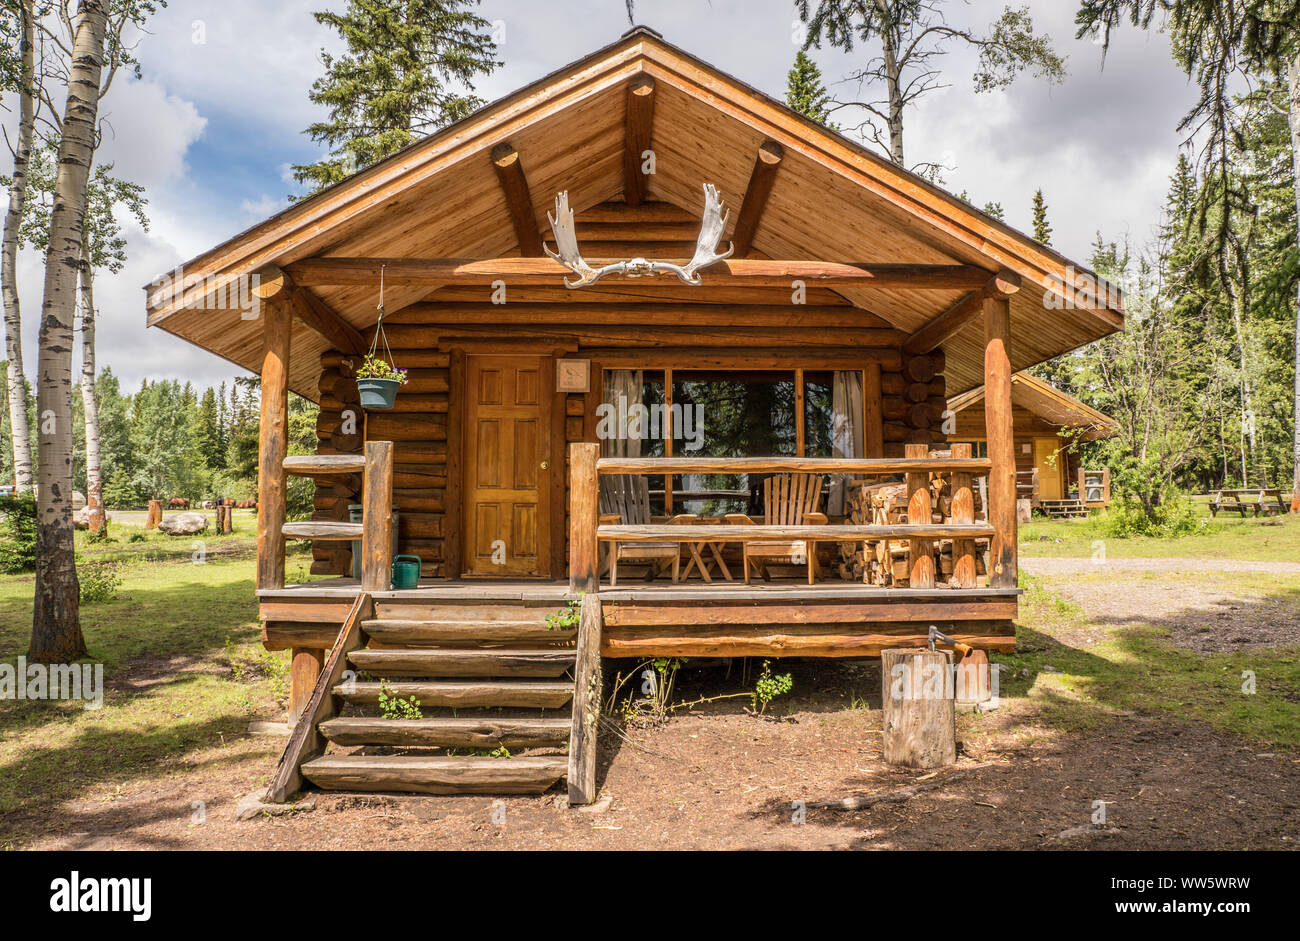 Log cabin from outside with antlers and firewood stack, British Columbia, Canada Stock Photo